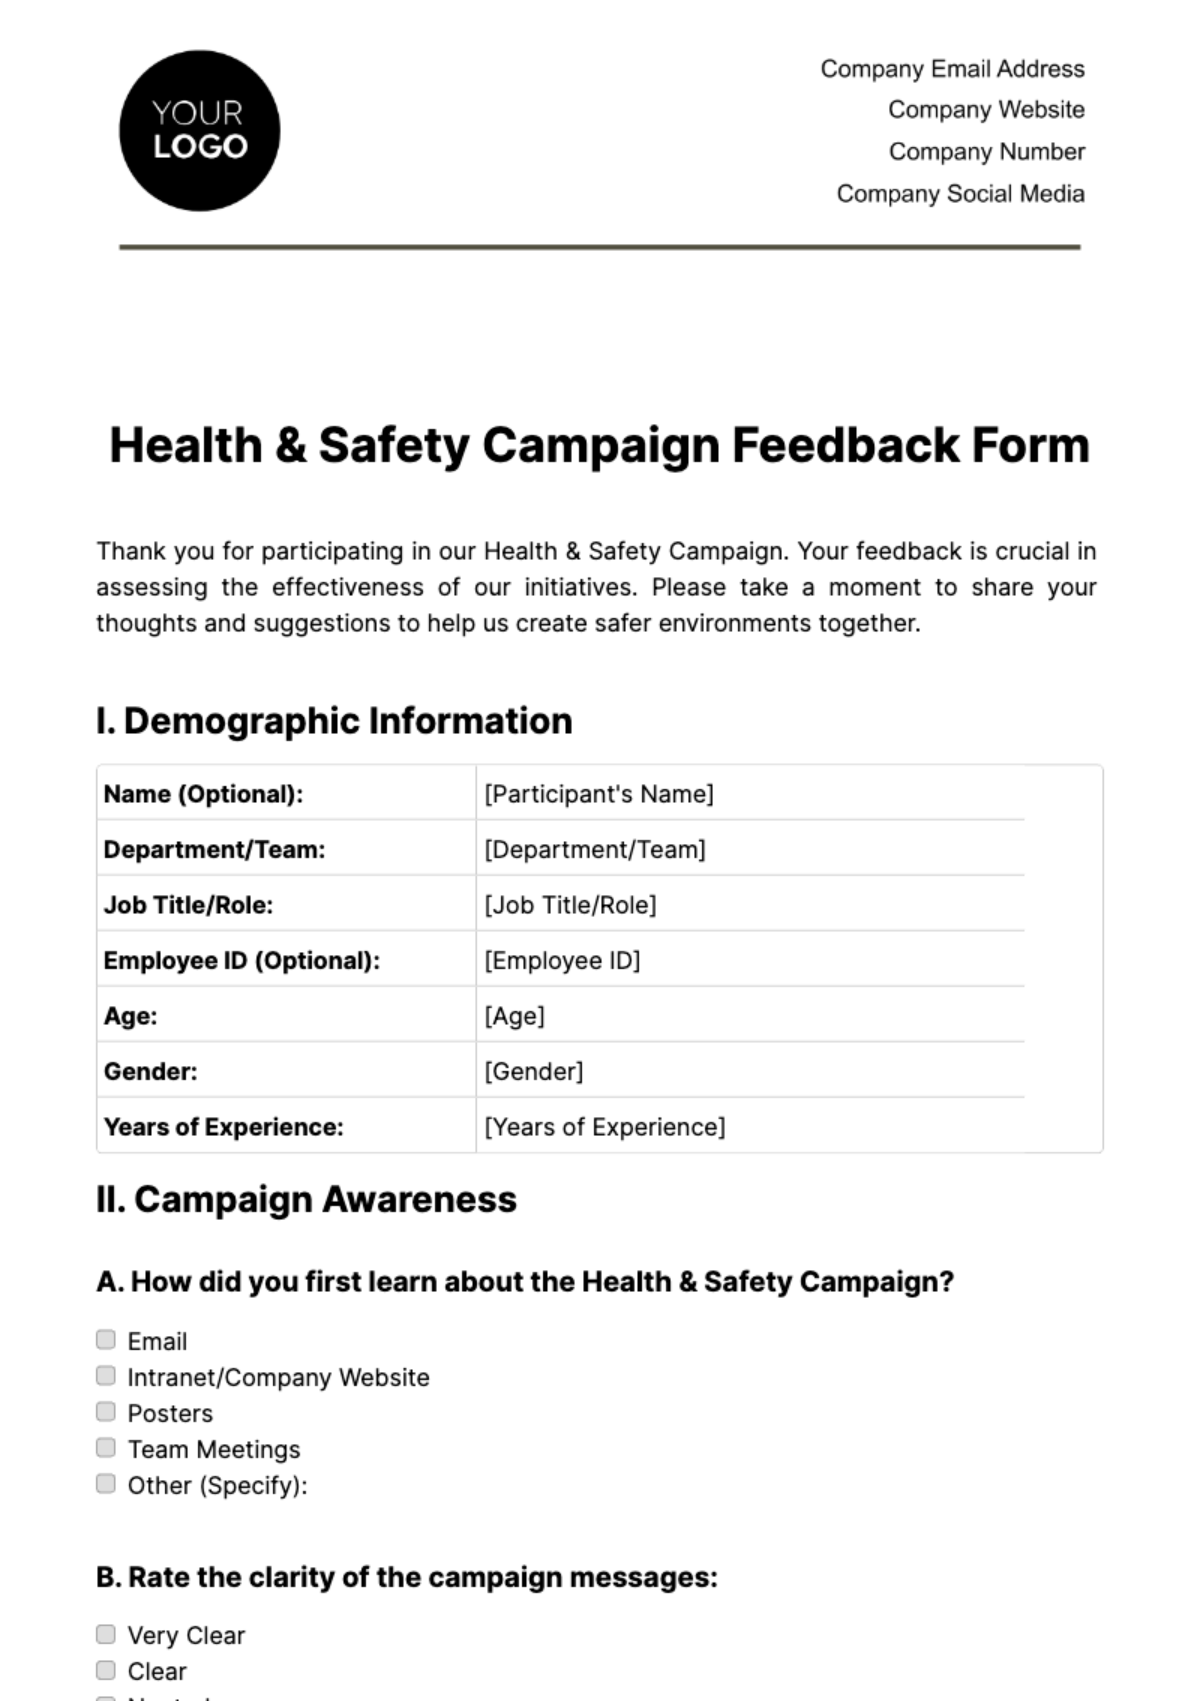 Health & Safety Campaign Feedback Form Template